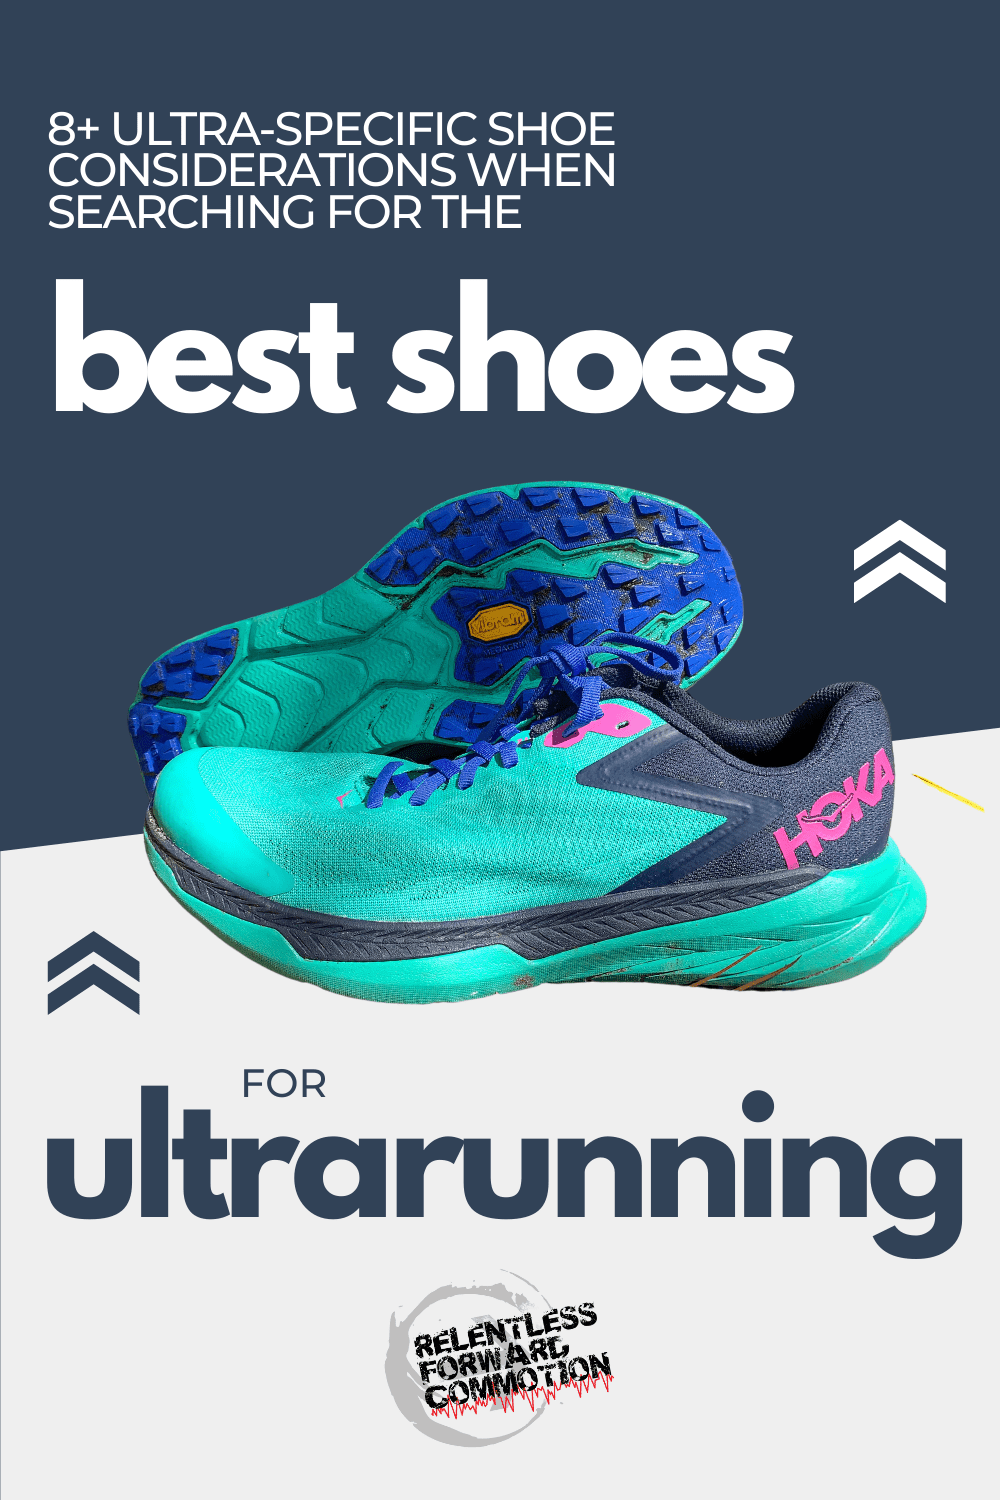 Owl axe plan The Best Shoes for Ultramarathon: 8+ Ultra Specific Shoe Considerations -  RELENTLESS FORWARD COMMOTION